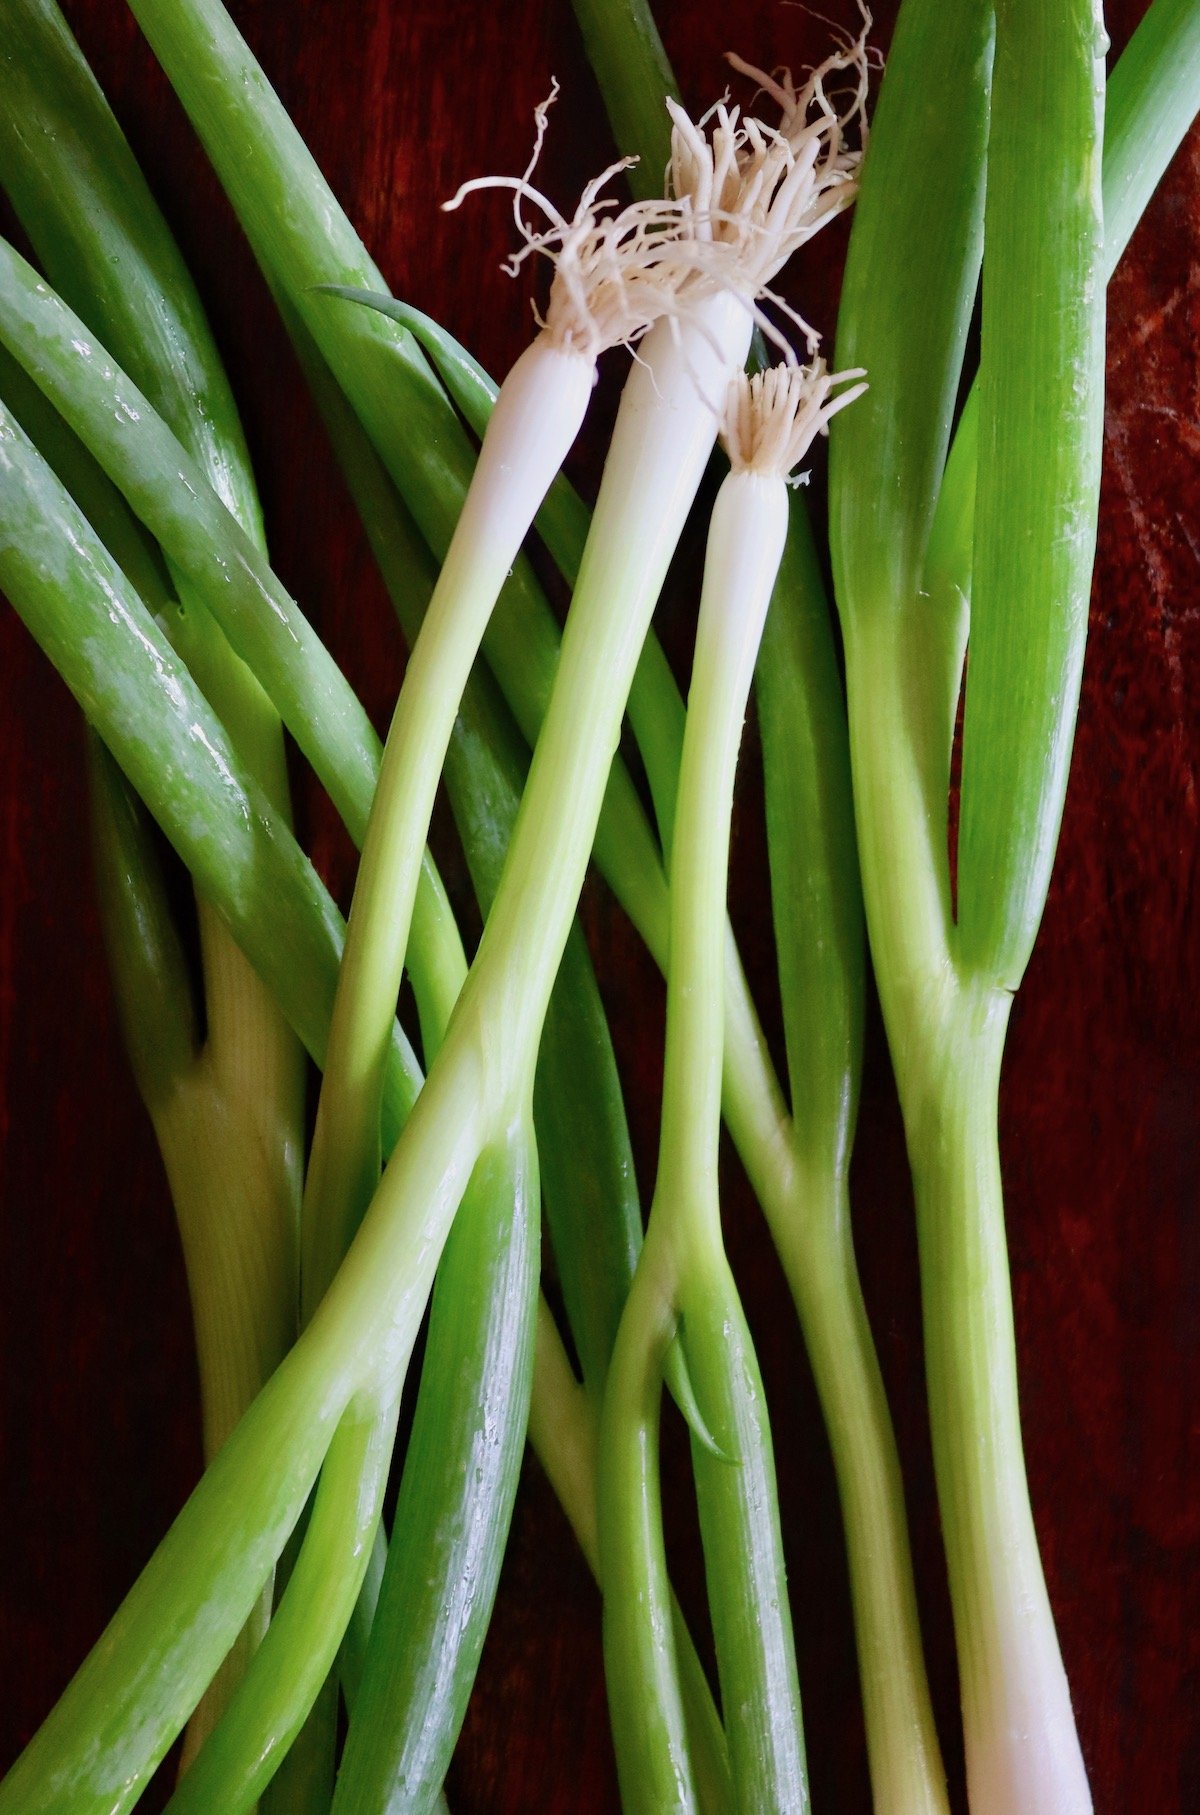 Several green onions on wood background.